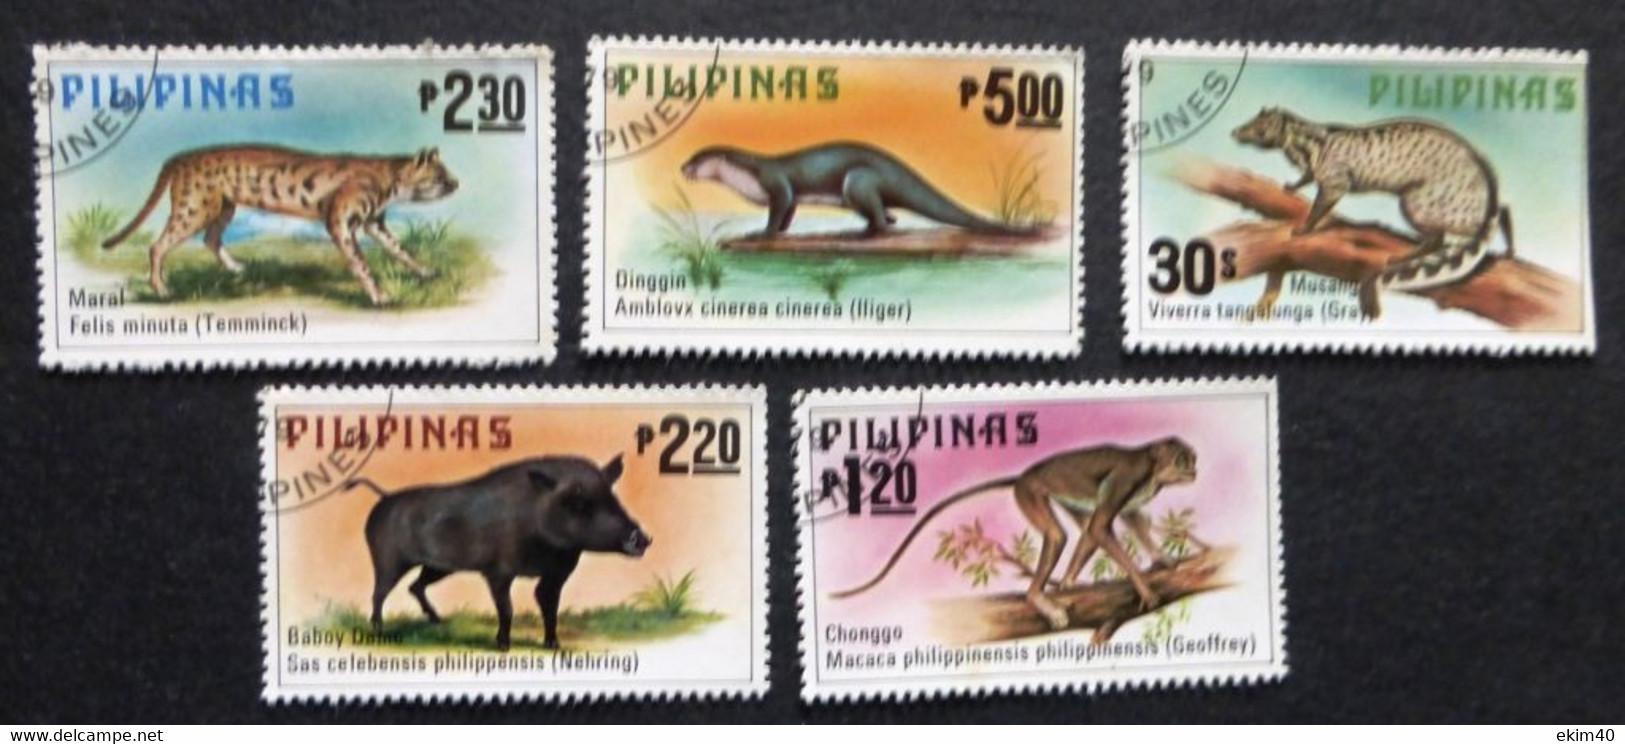 Selection Of Used/Cancelled Stamps From Philippines Wild Animals. No DC-373 - Usati